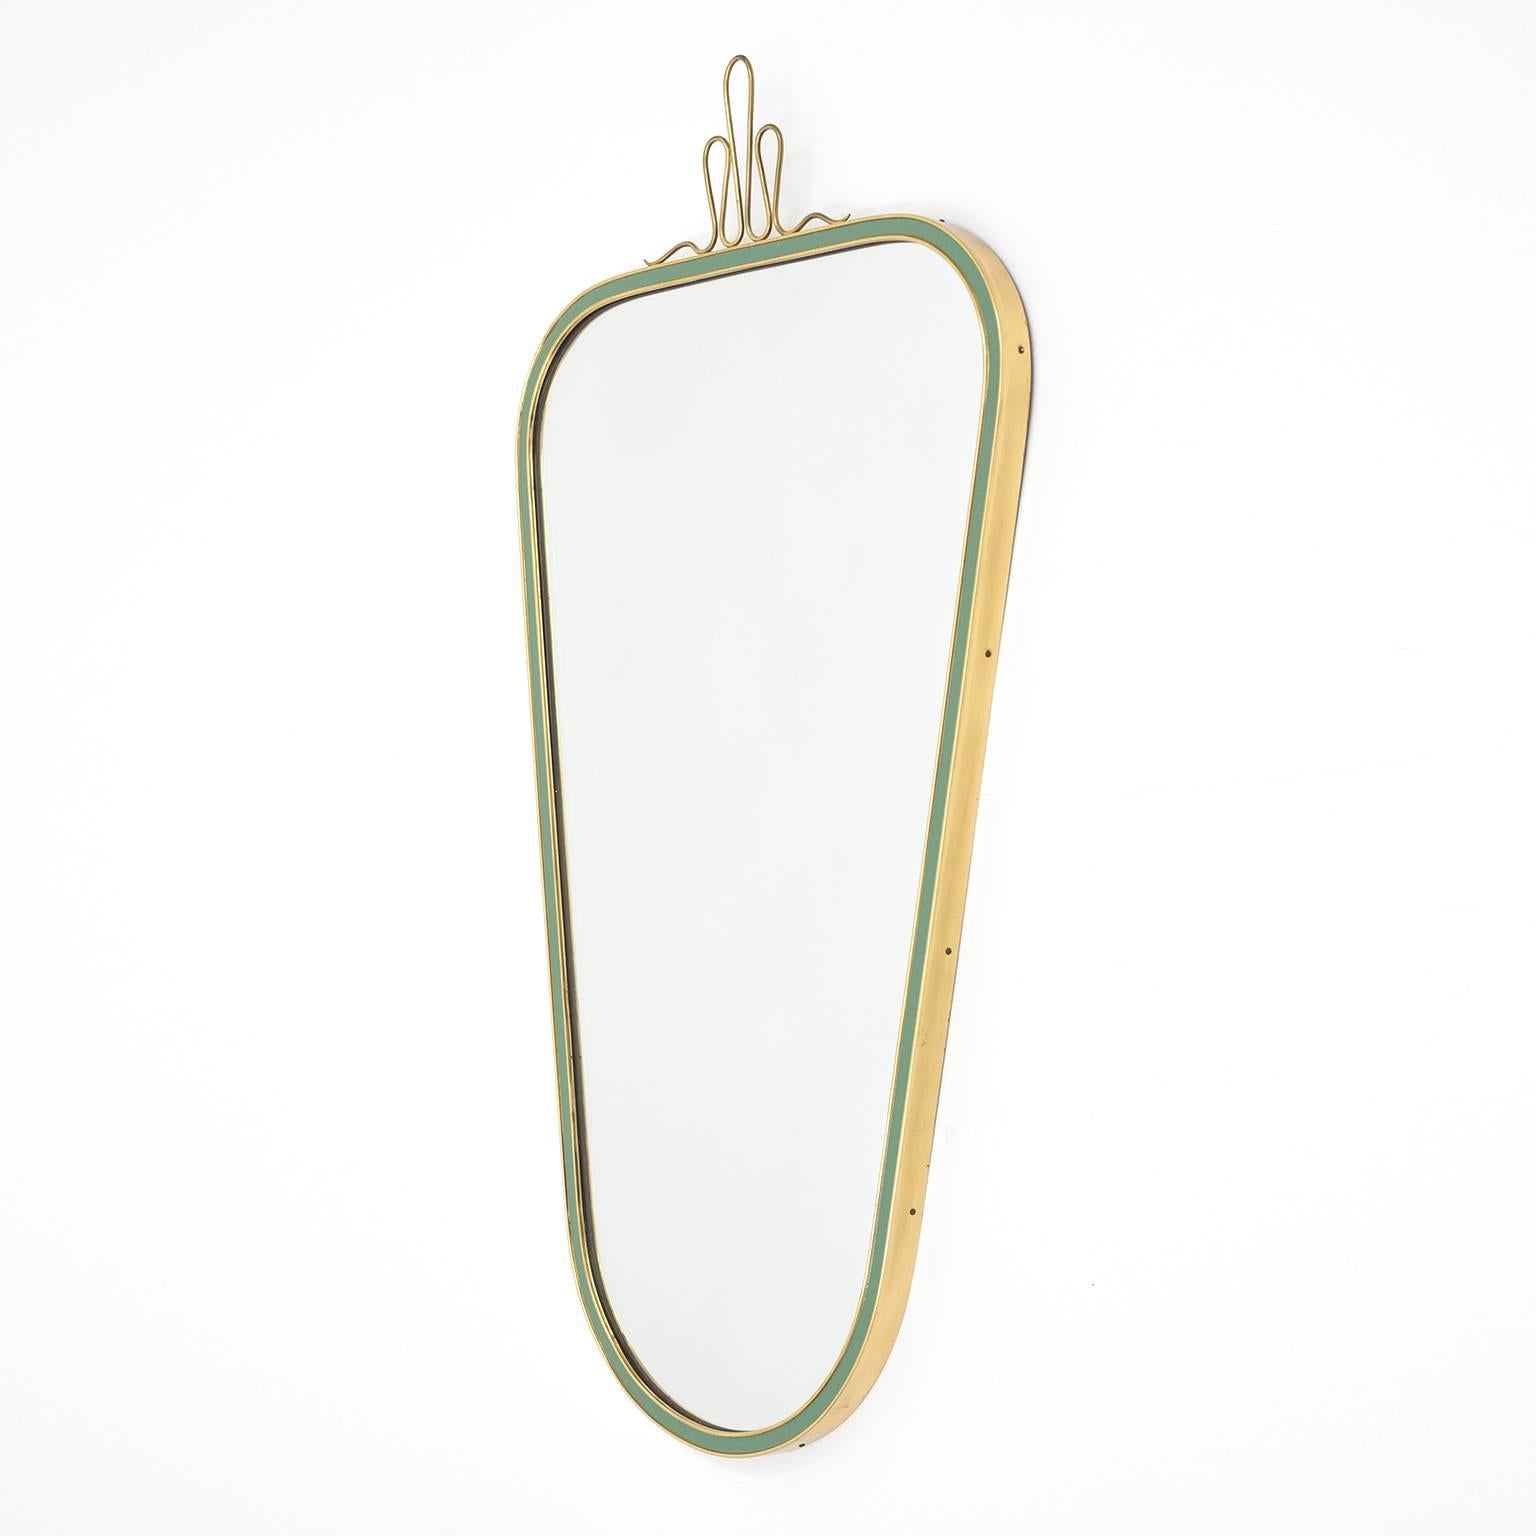 Lovely brass mirror from Germany, 1950s. Manufactured by 